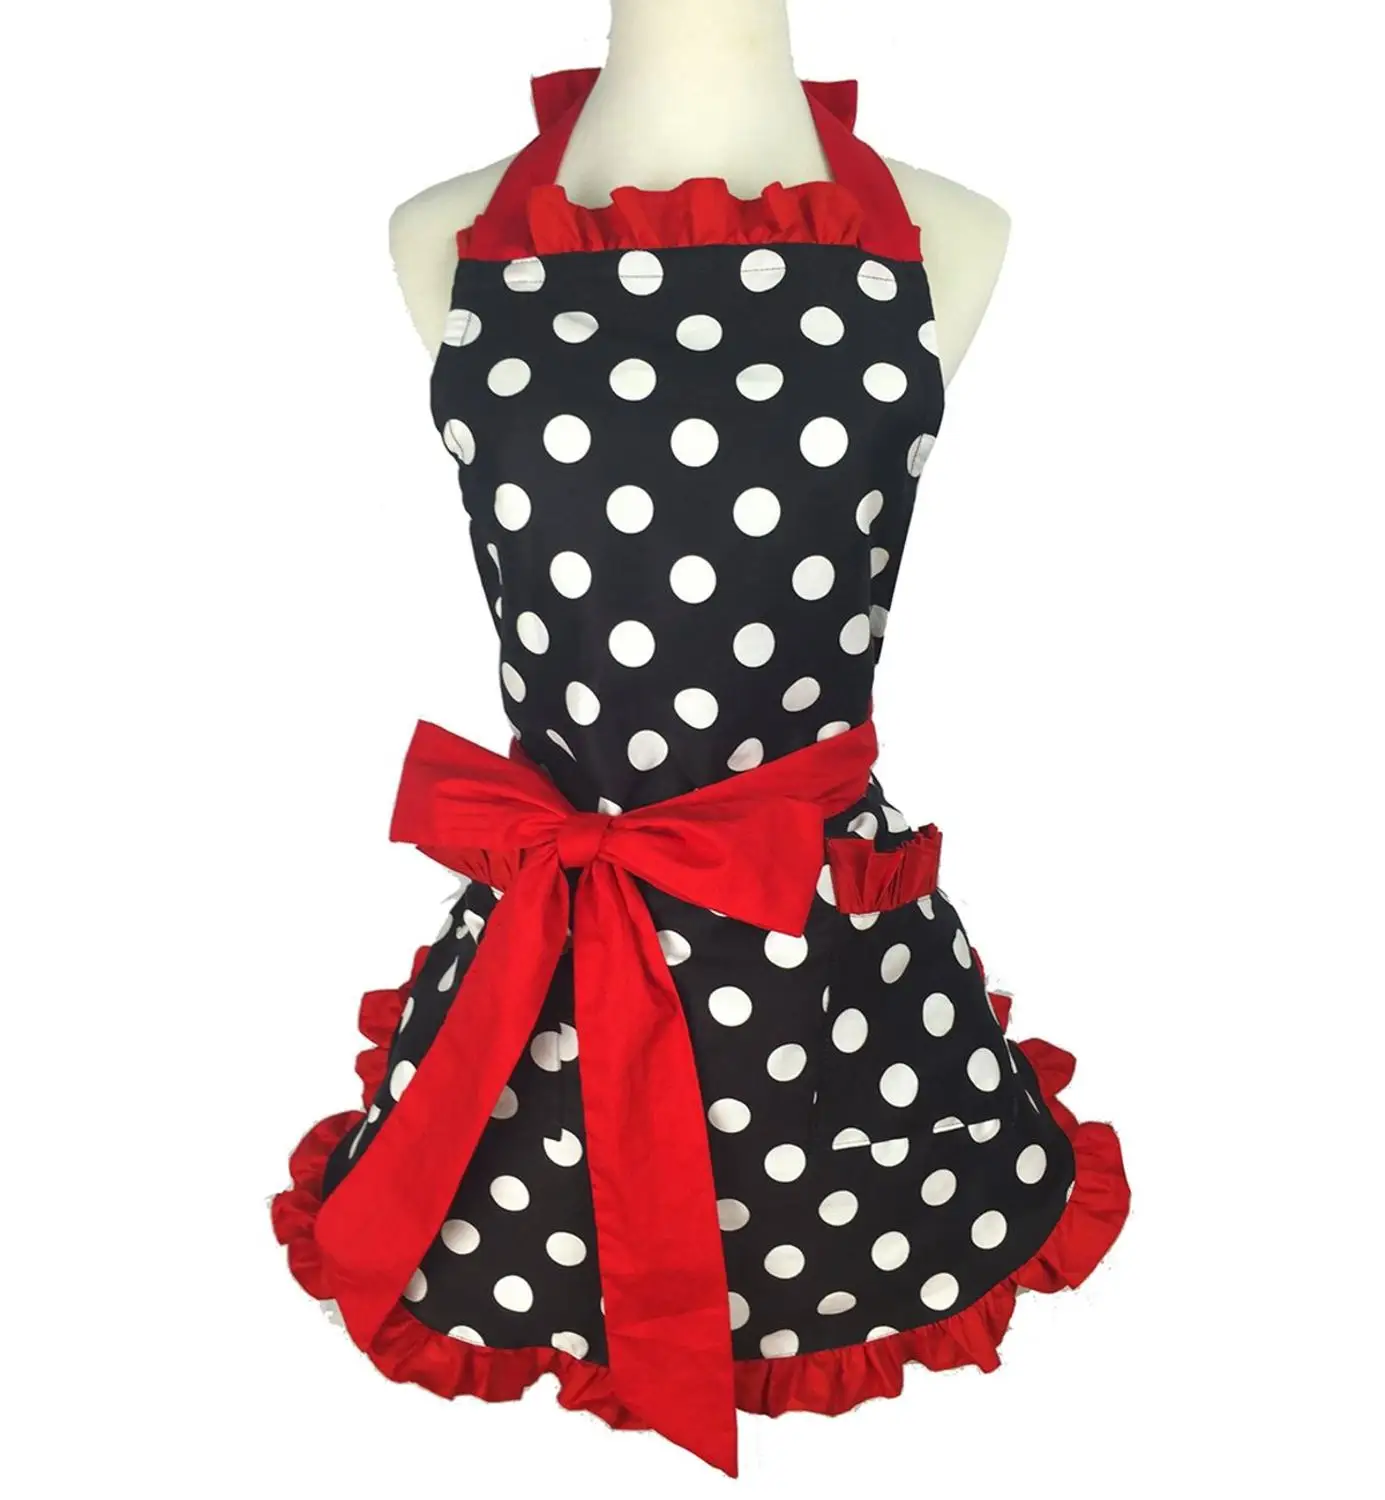 

New Retro Apron for Women Super Cute and Funny Bowknot with Pocket Adjustable Cotton Polka Dot Delicate Hemline Cooking Aprons